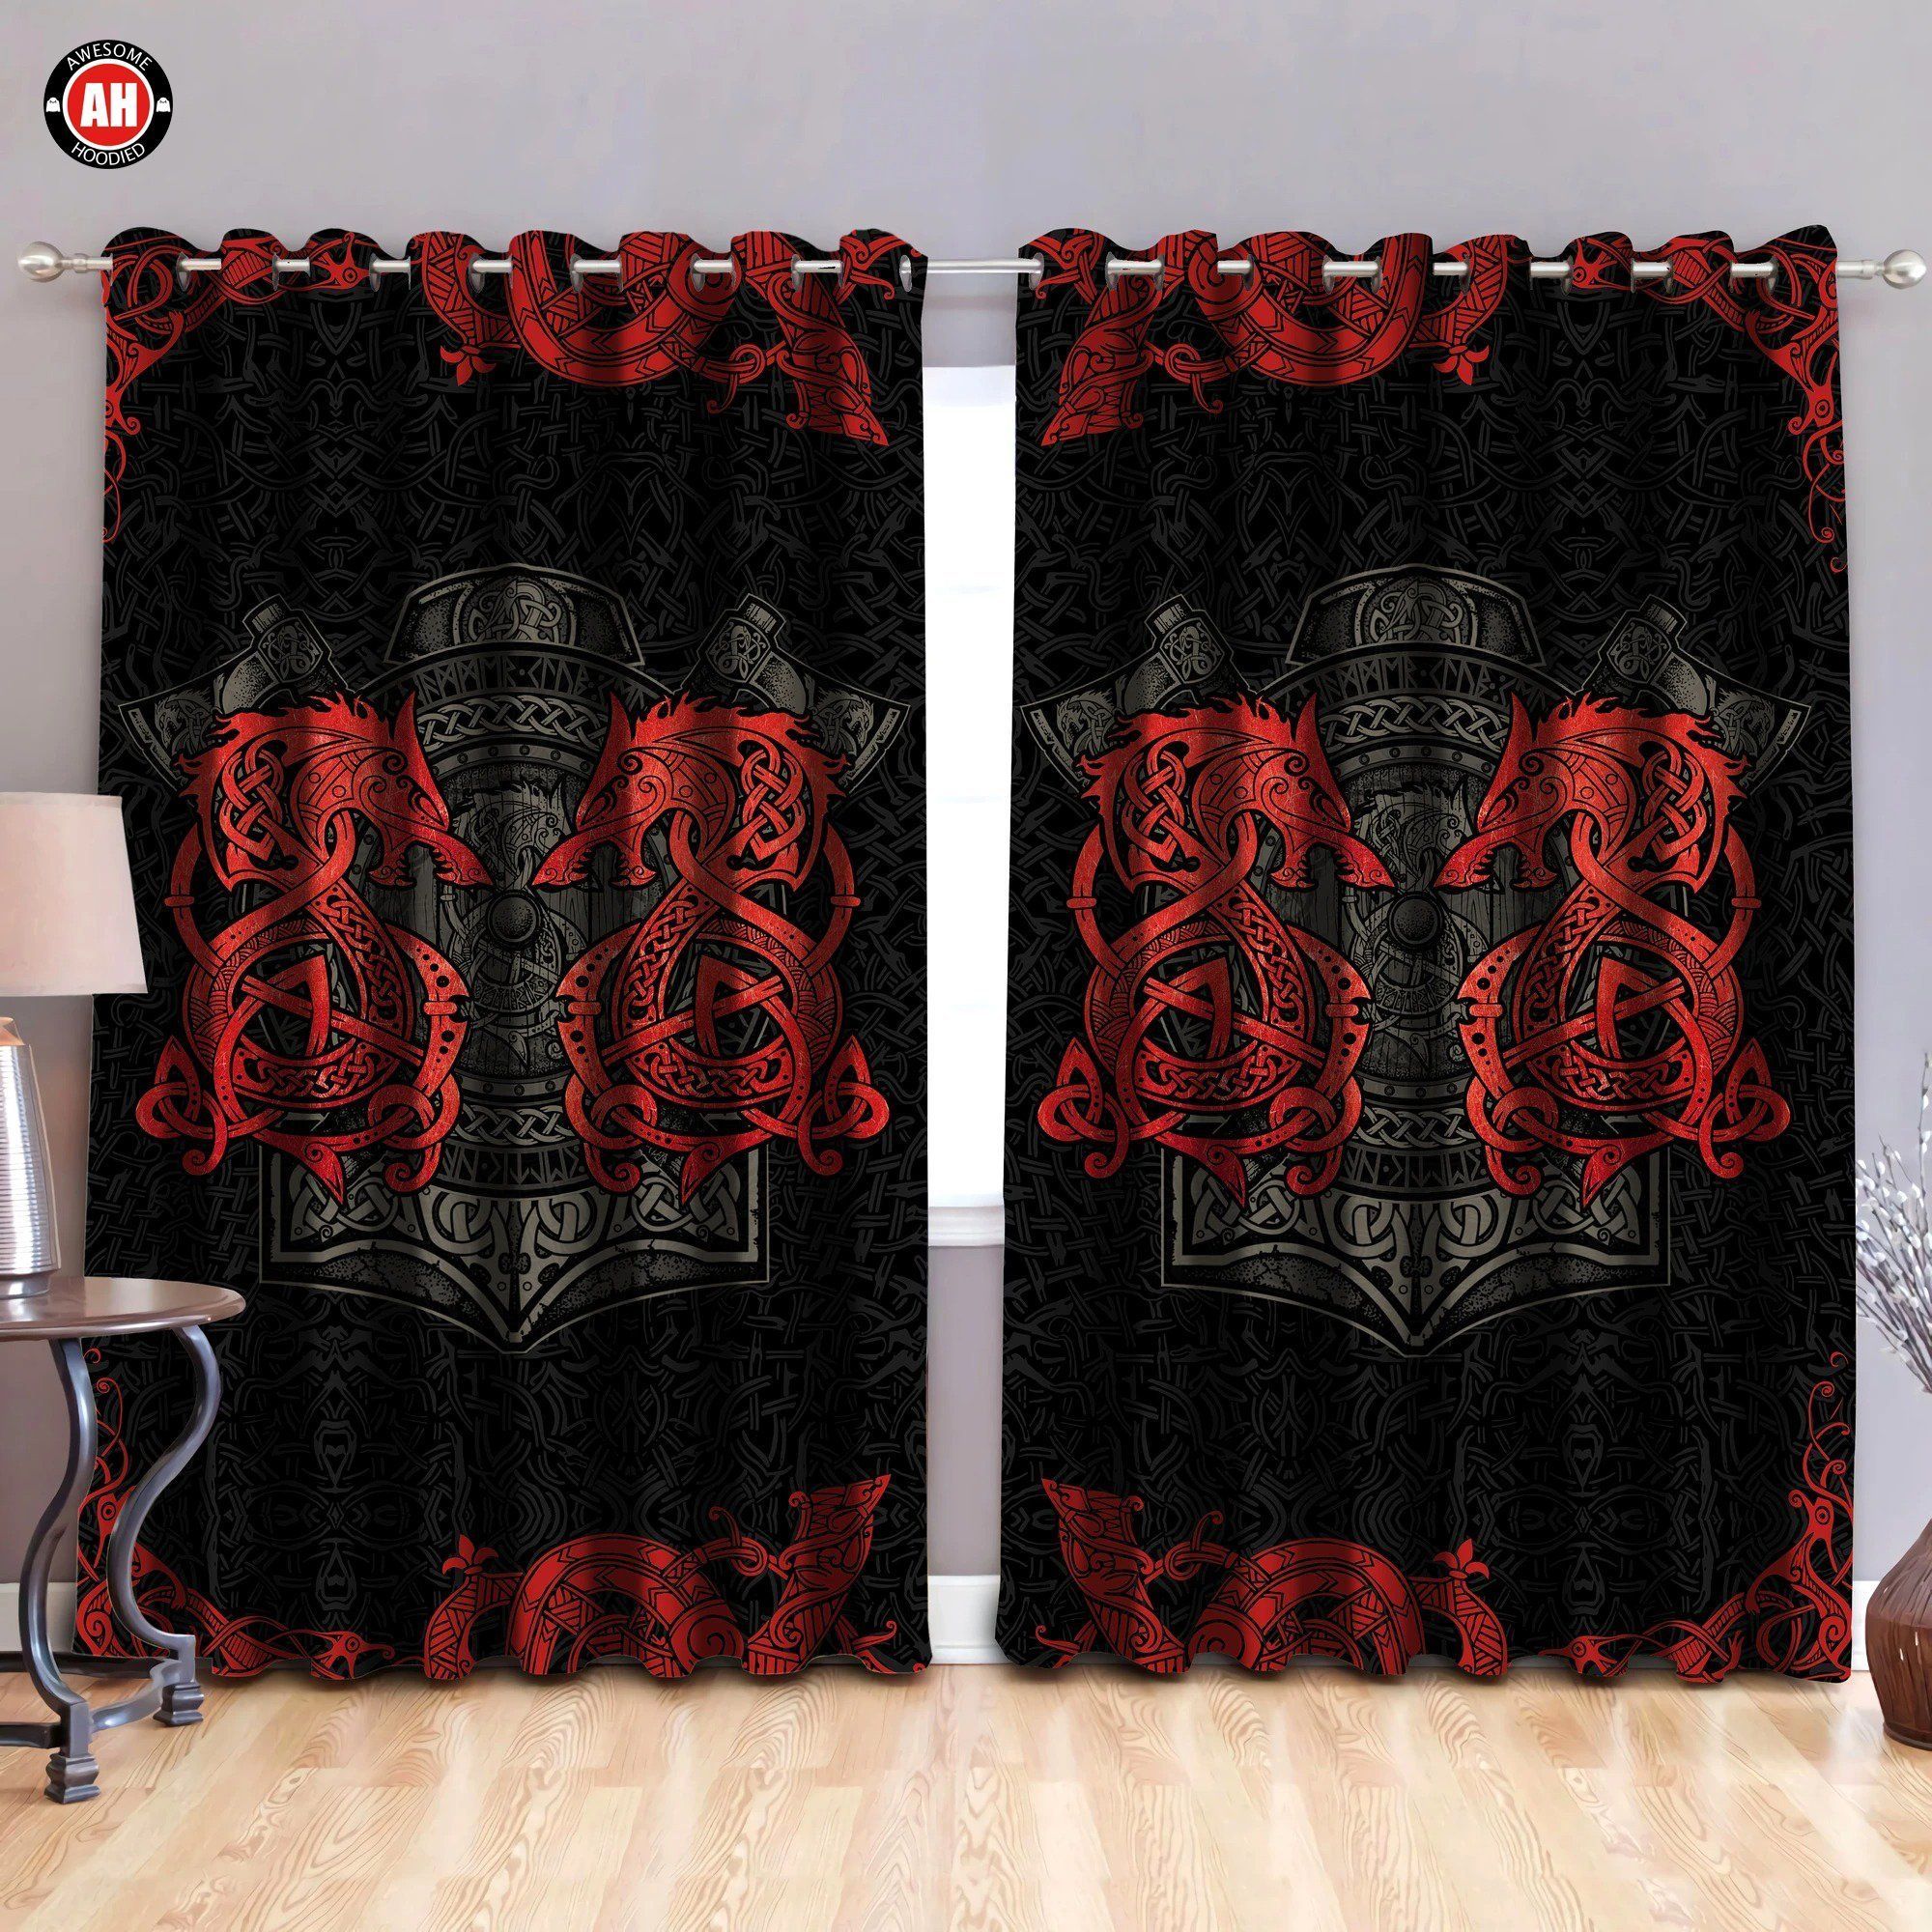 Royal Architecture Red Viking Dragon Printed Window Curtain - Dragon Blackout Curtains